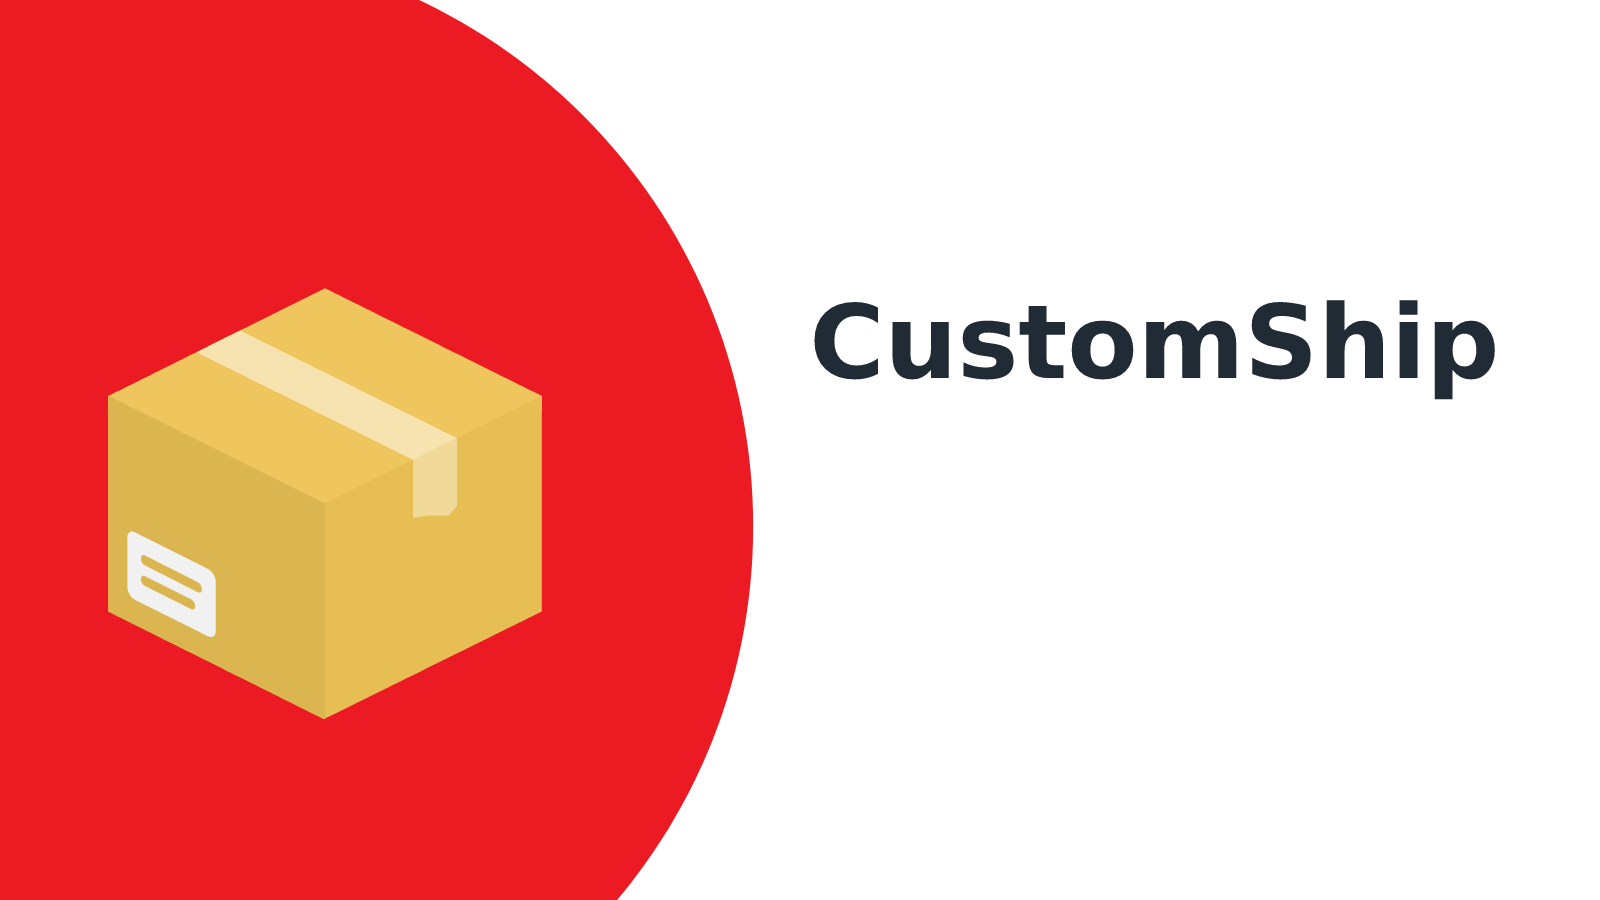 CustomShip - Take control of your shipping costs